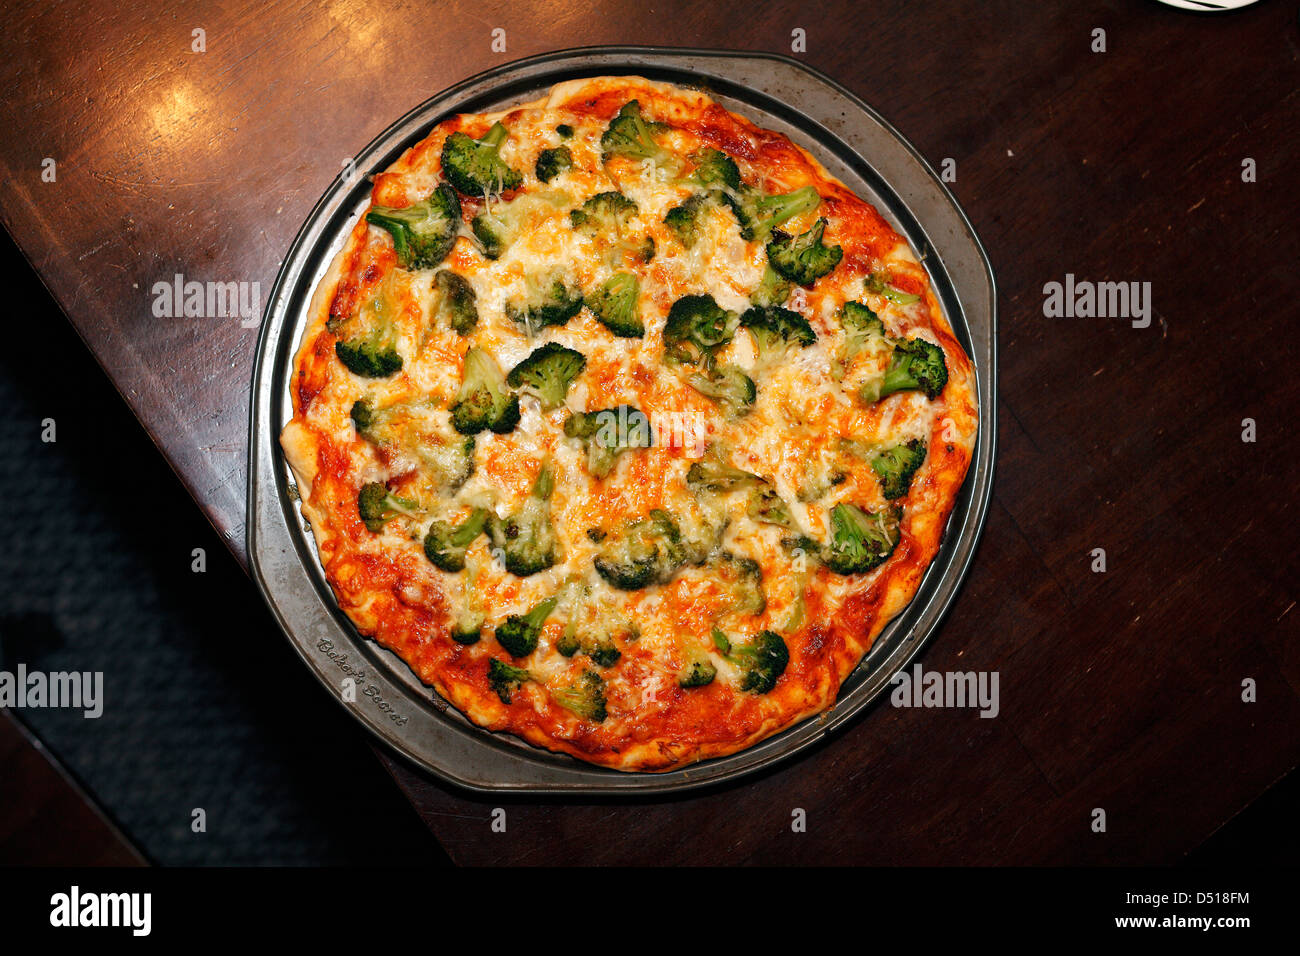 Broccoli and cheese pizza. Stock Photo